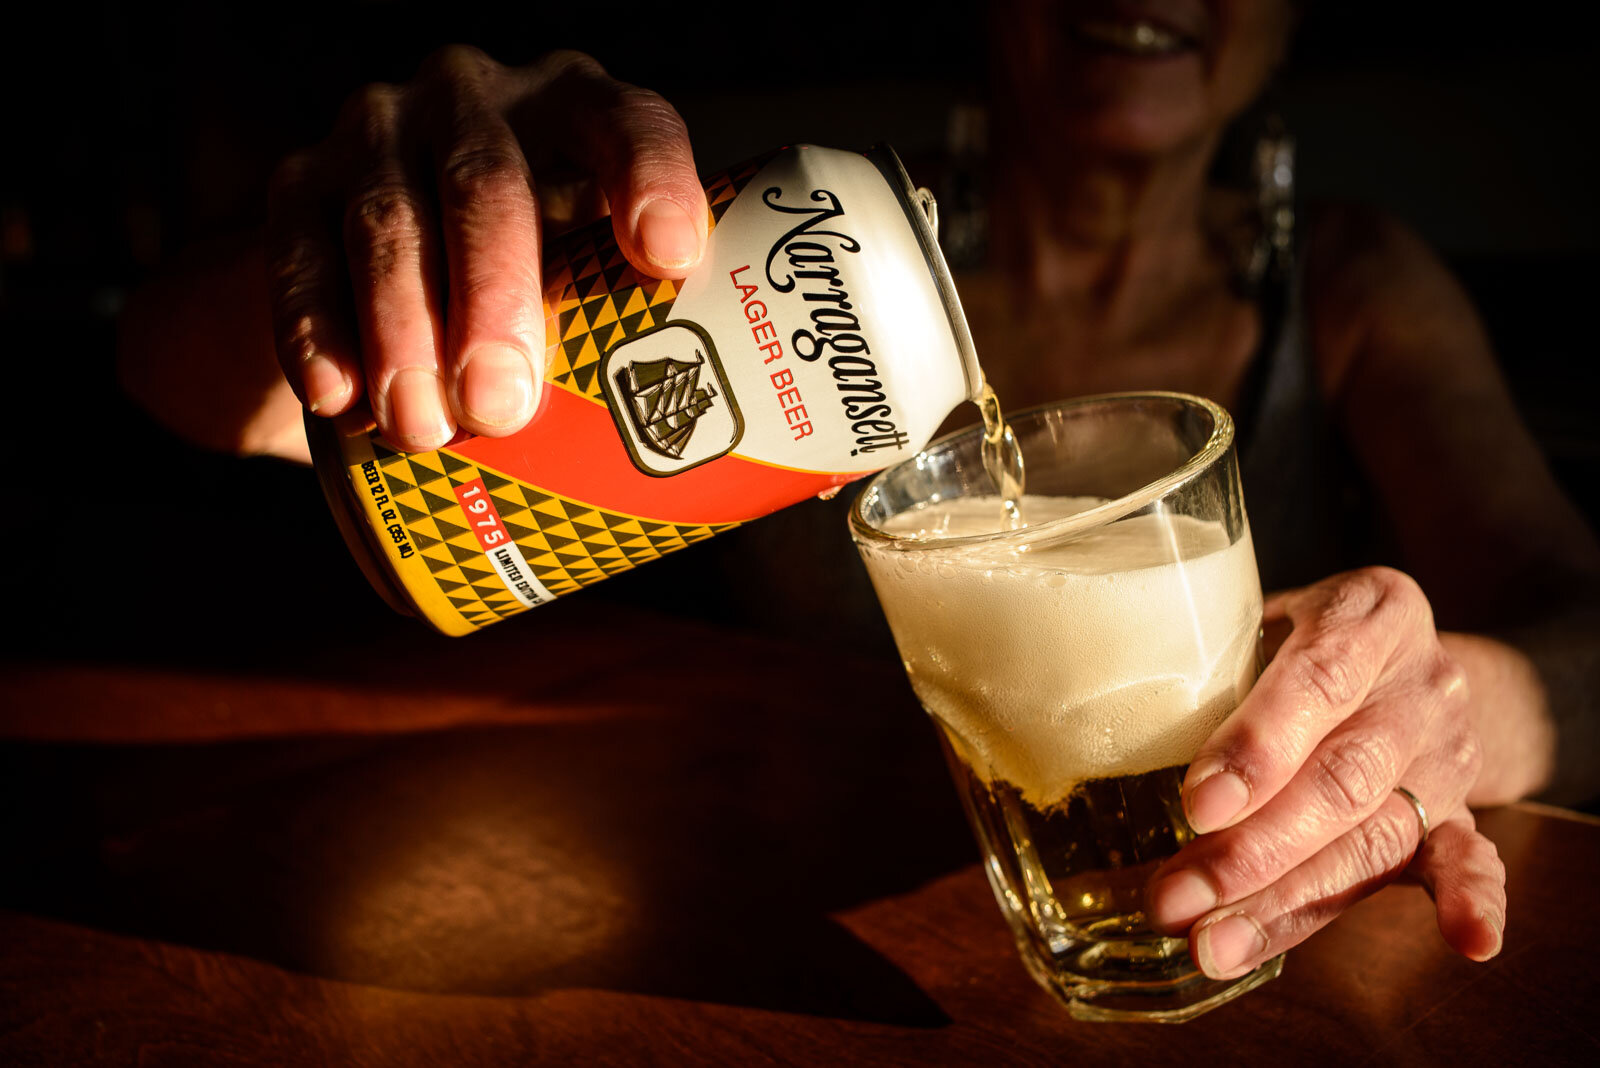  Narraganset beer at Sunny's bar  in Red Hook at  253 Conover St, Brooklyn, NY 11231.  photo by Stefano Giovannini 